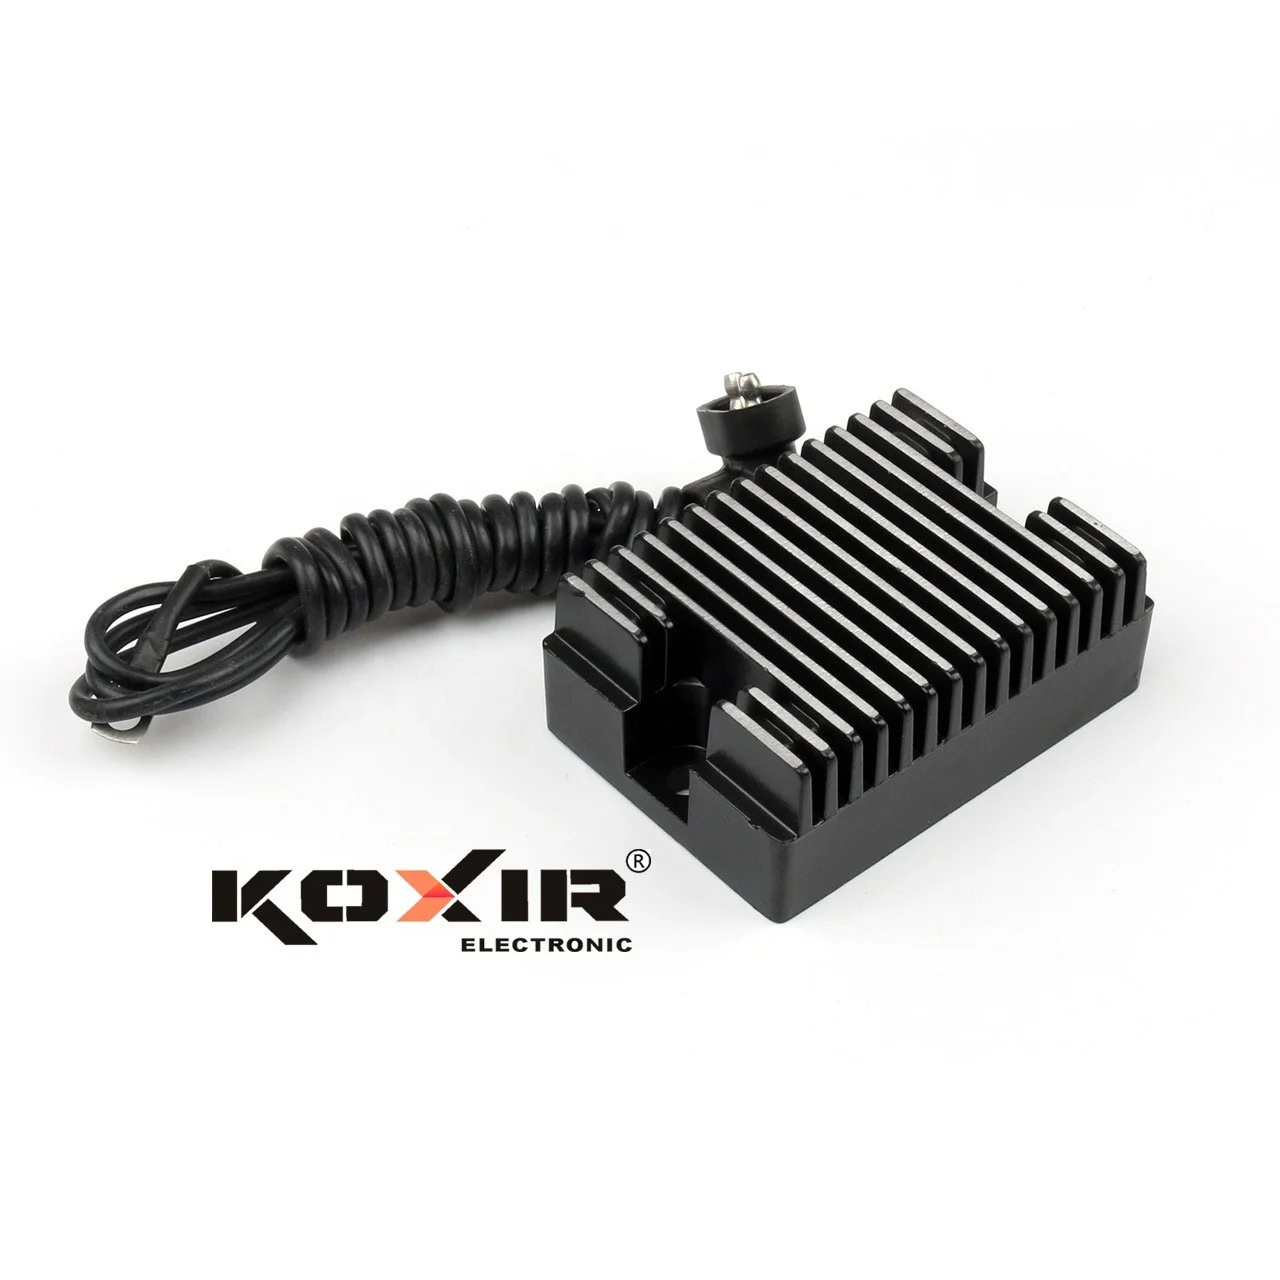 KOXIR Low Temperature MOSFET Voltage Regulator Rectifier Fit For Harley EVO 1989-1999 1340 Replace 74519-88 74519-88A